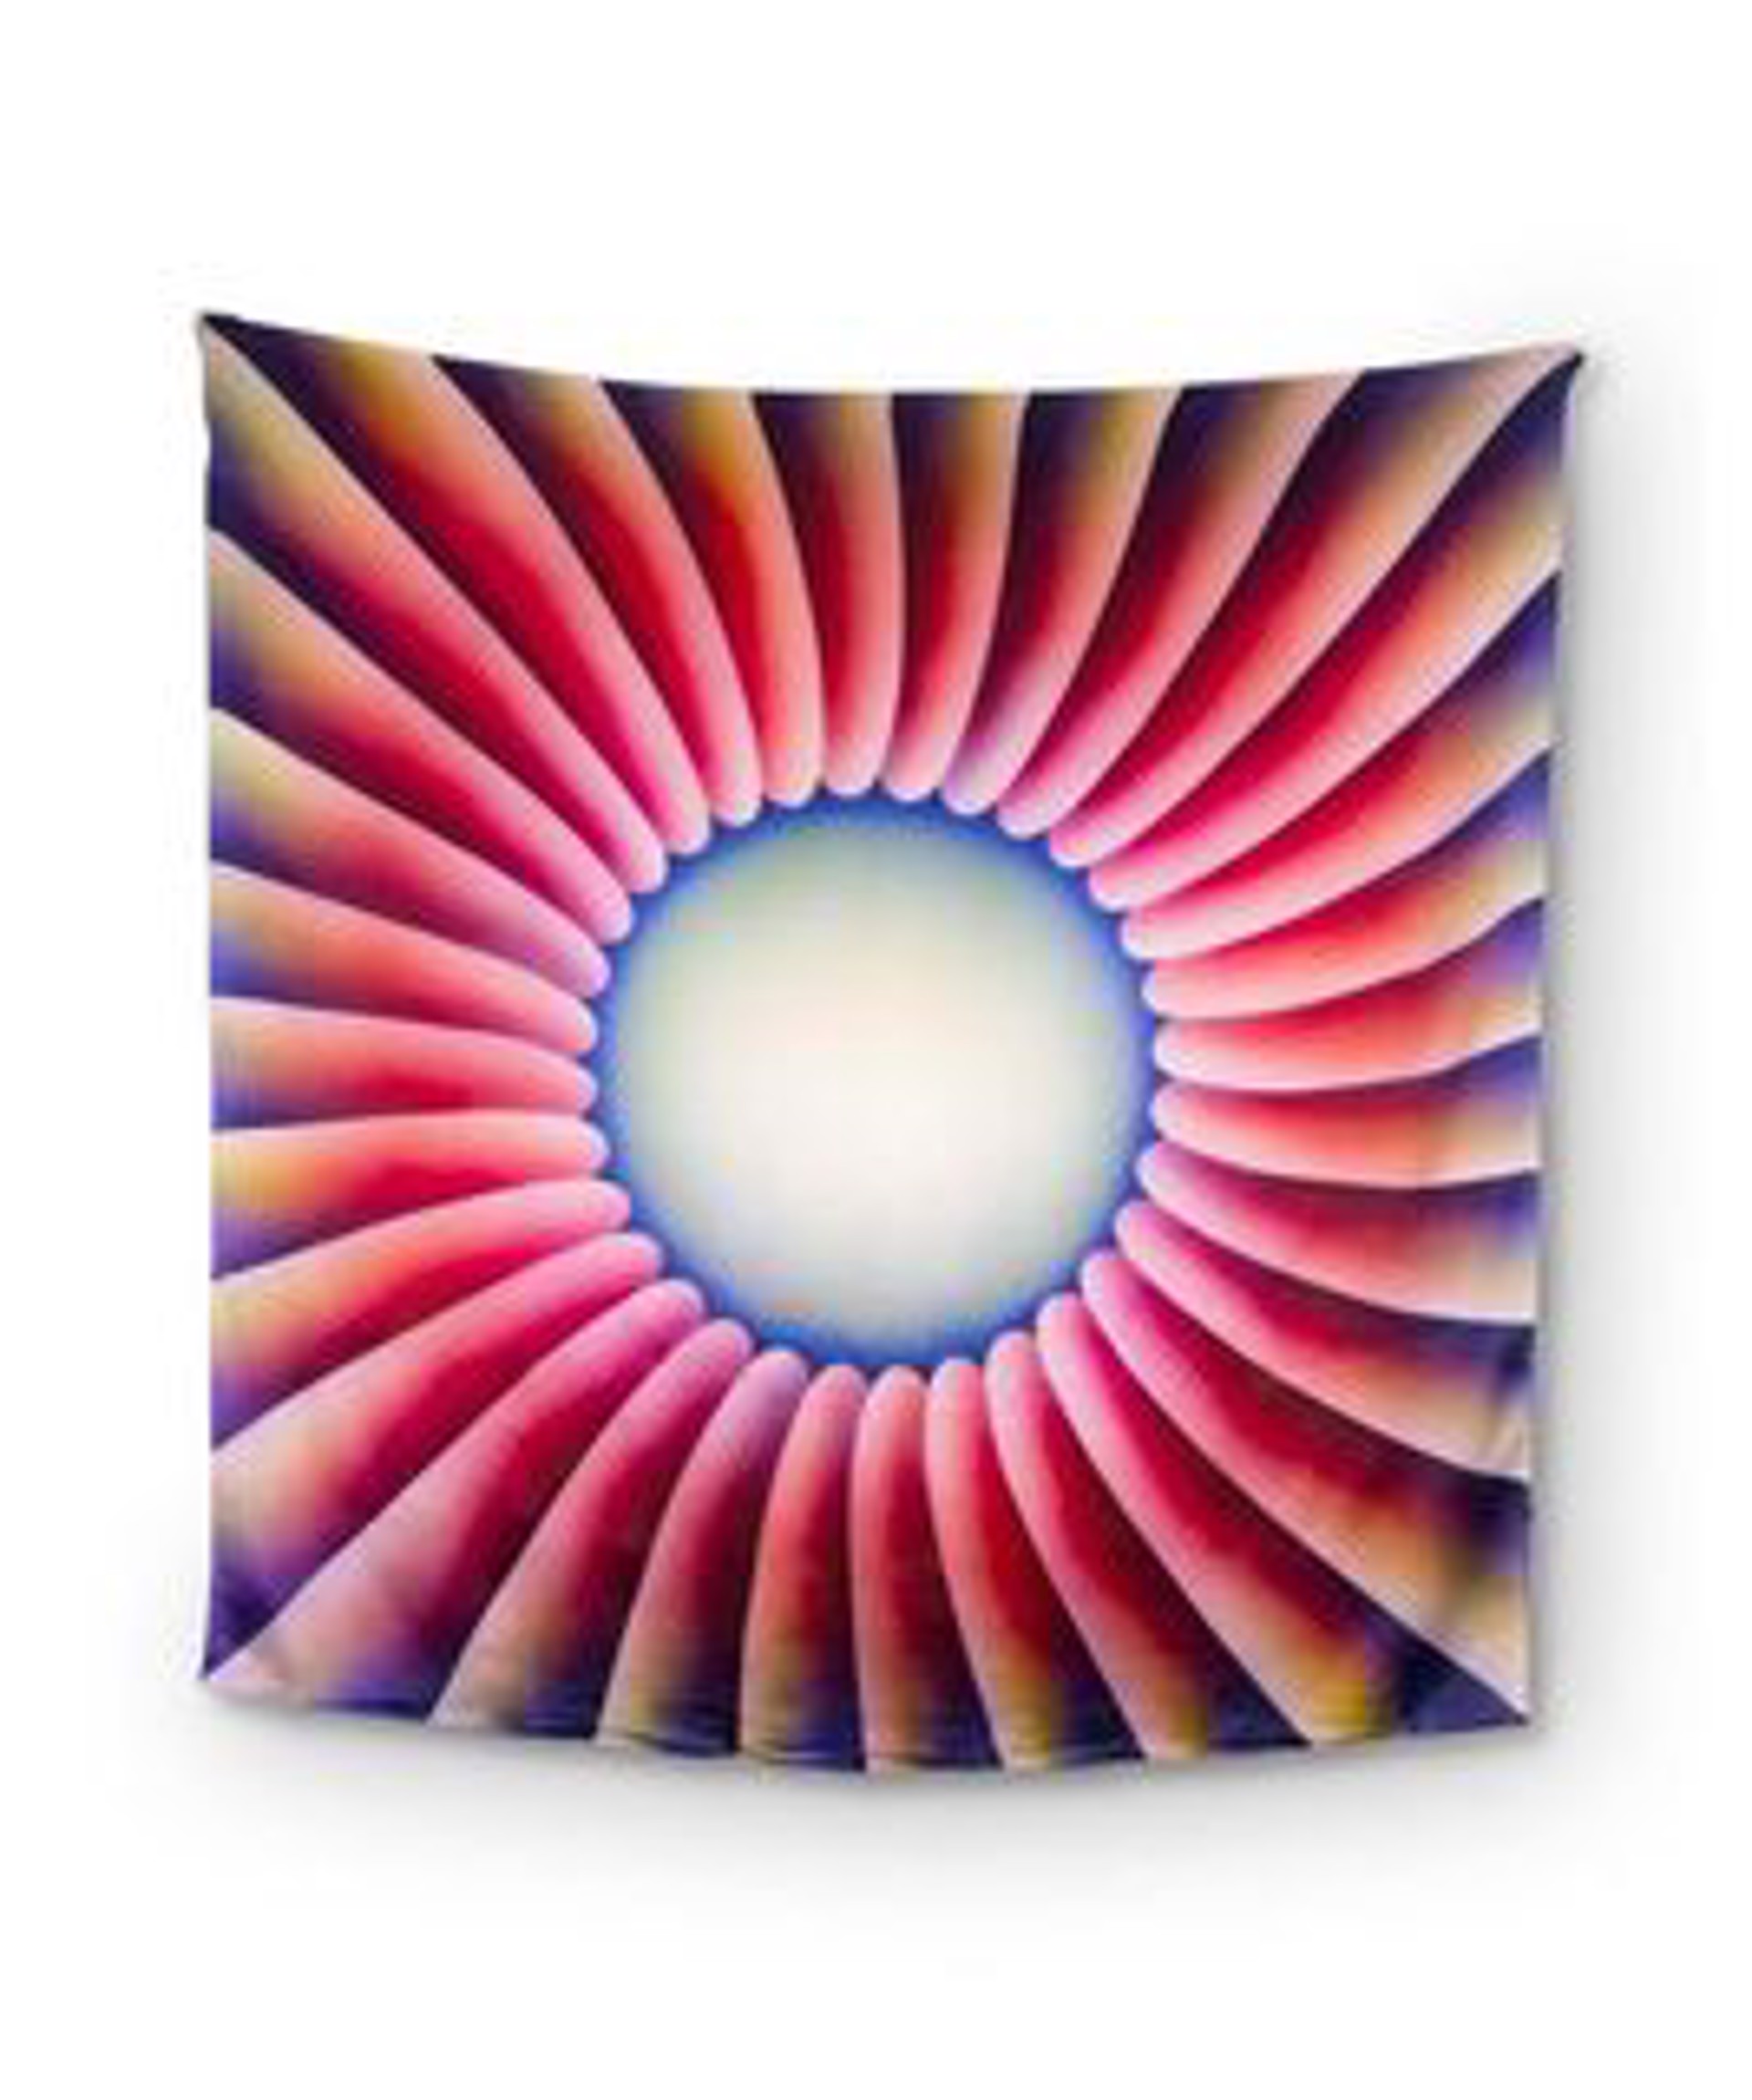 Through the Flower Scarf by Judy Chicago